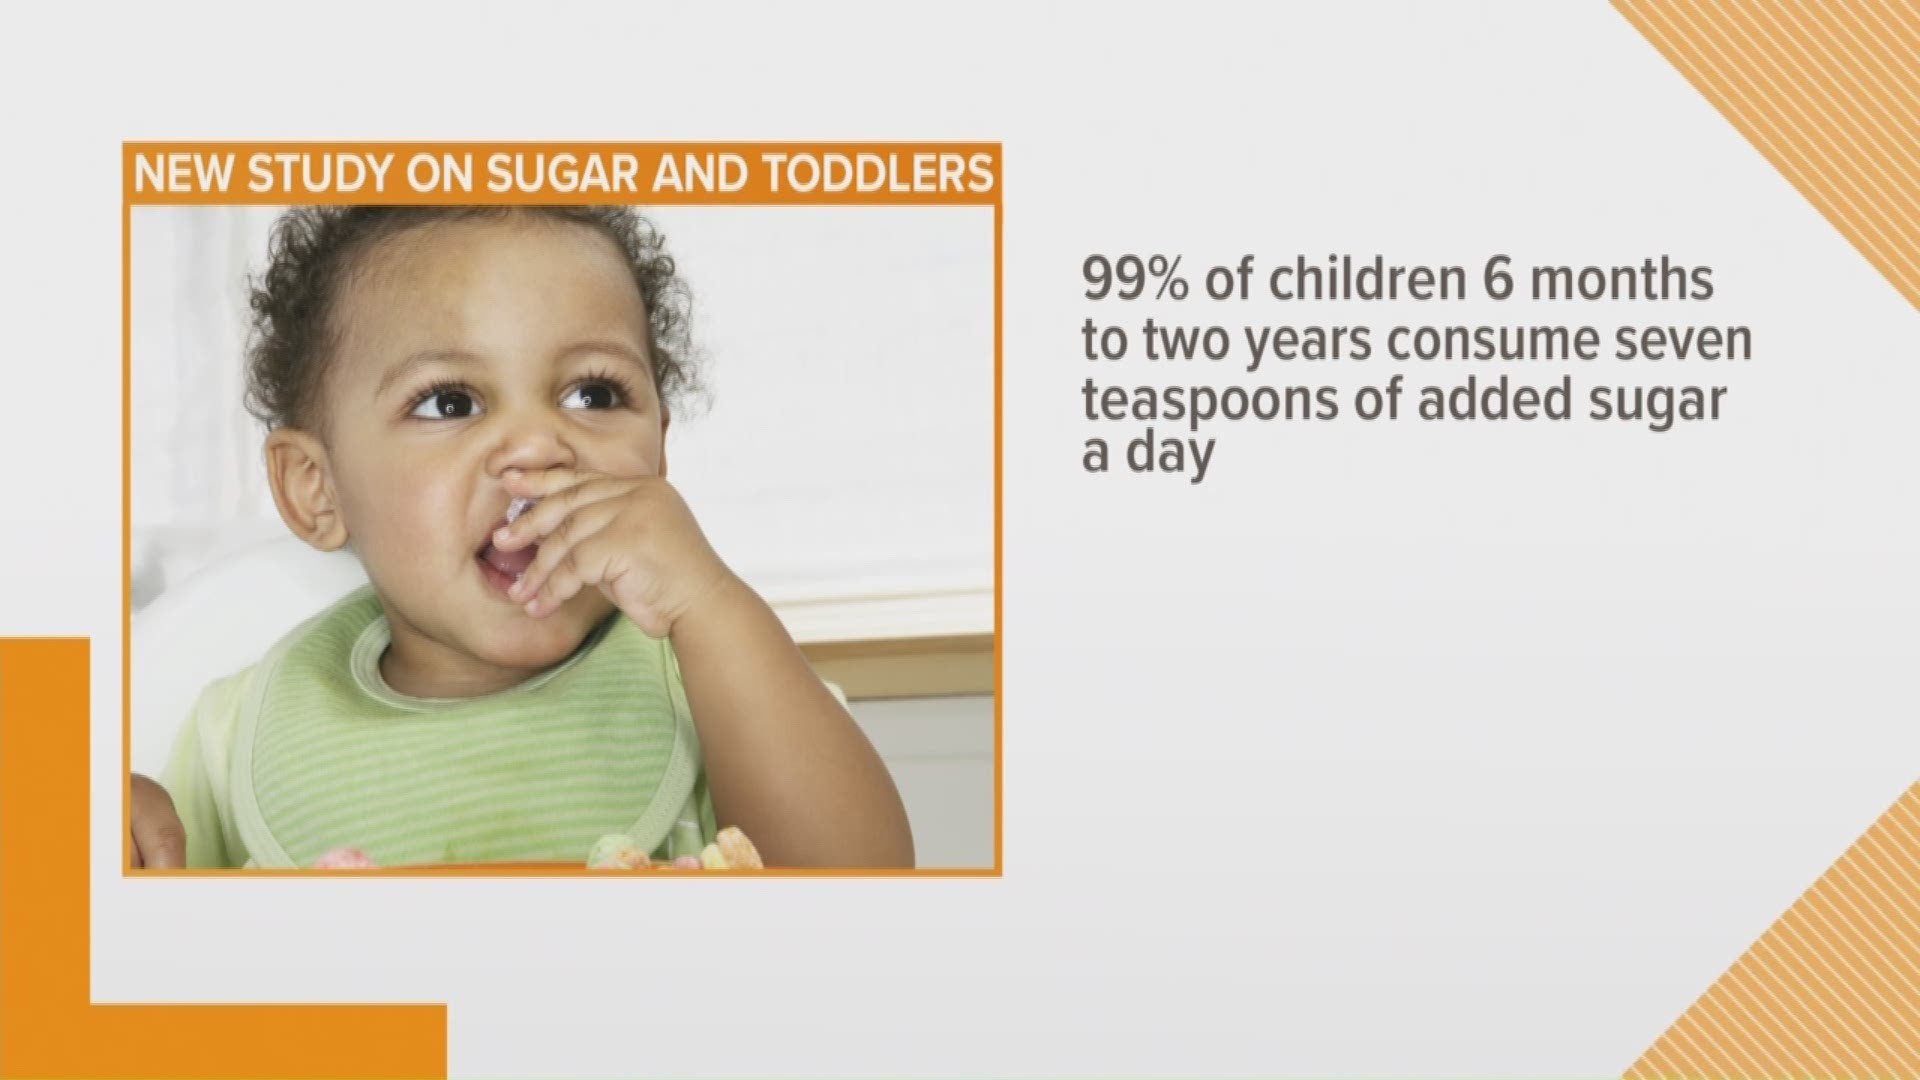 Added sugar guidelines for toddlers